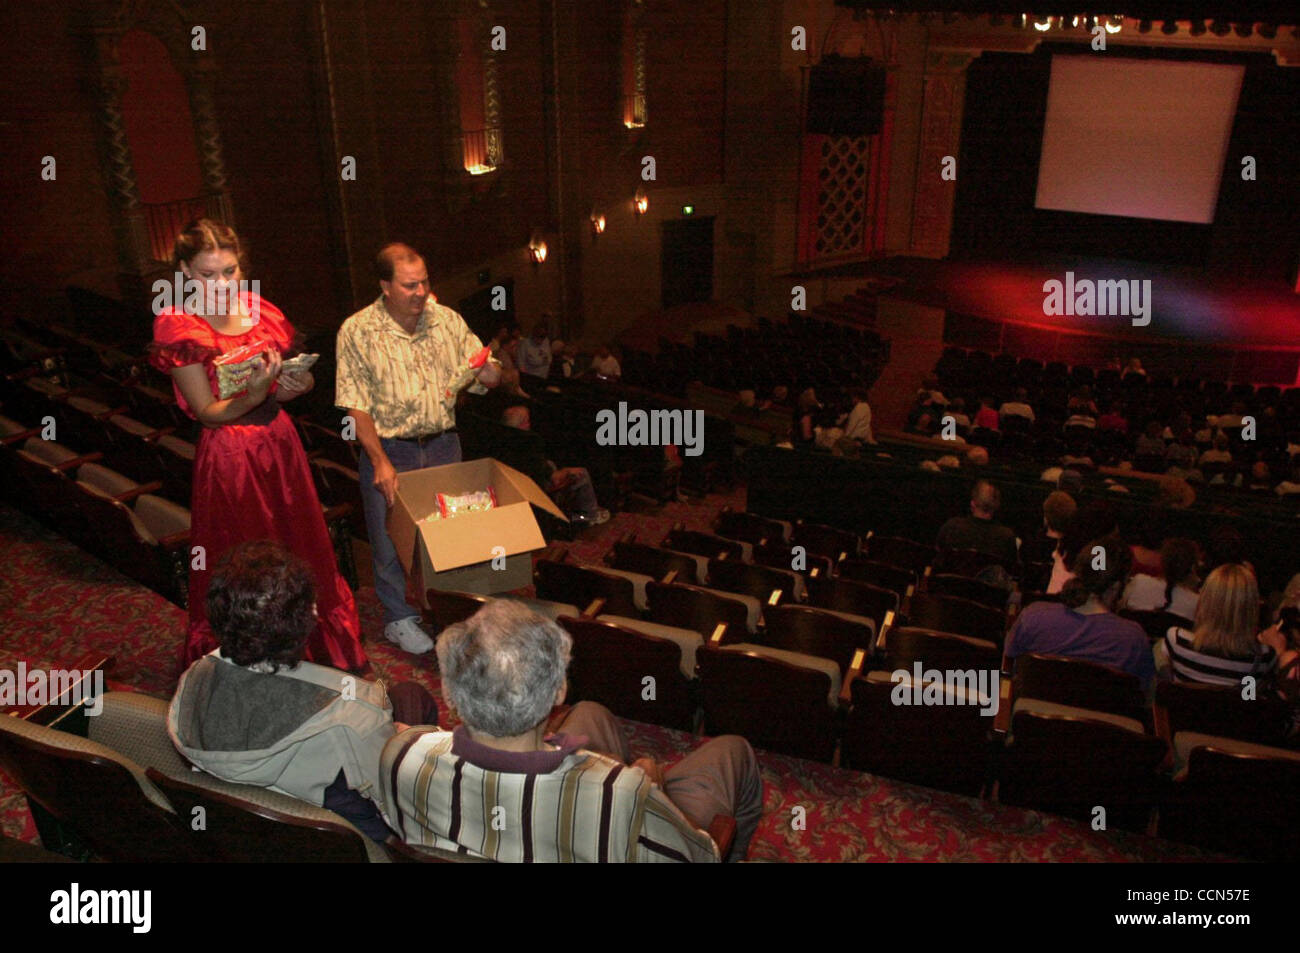 Esther Park an El Campanil Theatre board member dressed as Scarlett O'Hara sells popcorn with Andrew Johnson of Antioch, Calif., before the start of the movie 'Gone With the Wind' at the newly restored El Campanil Theatre in Antioch, Calif., on Friday, August 6, 2004. The historic El Campanil Theatr Stock Photo